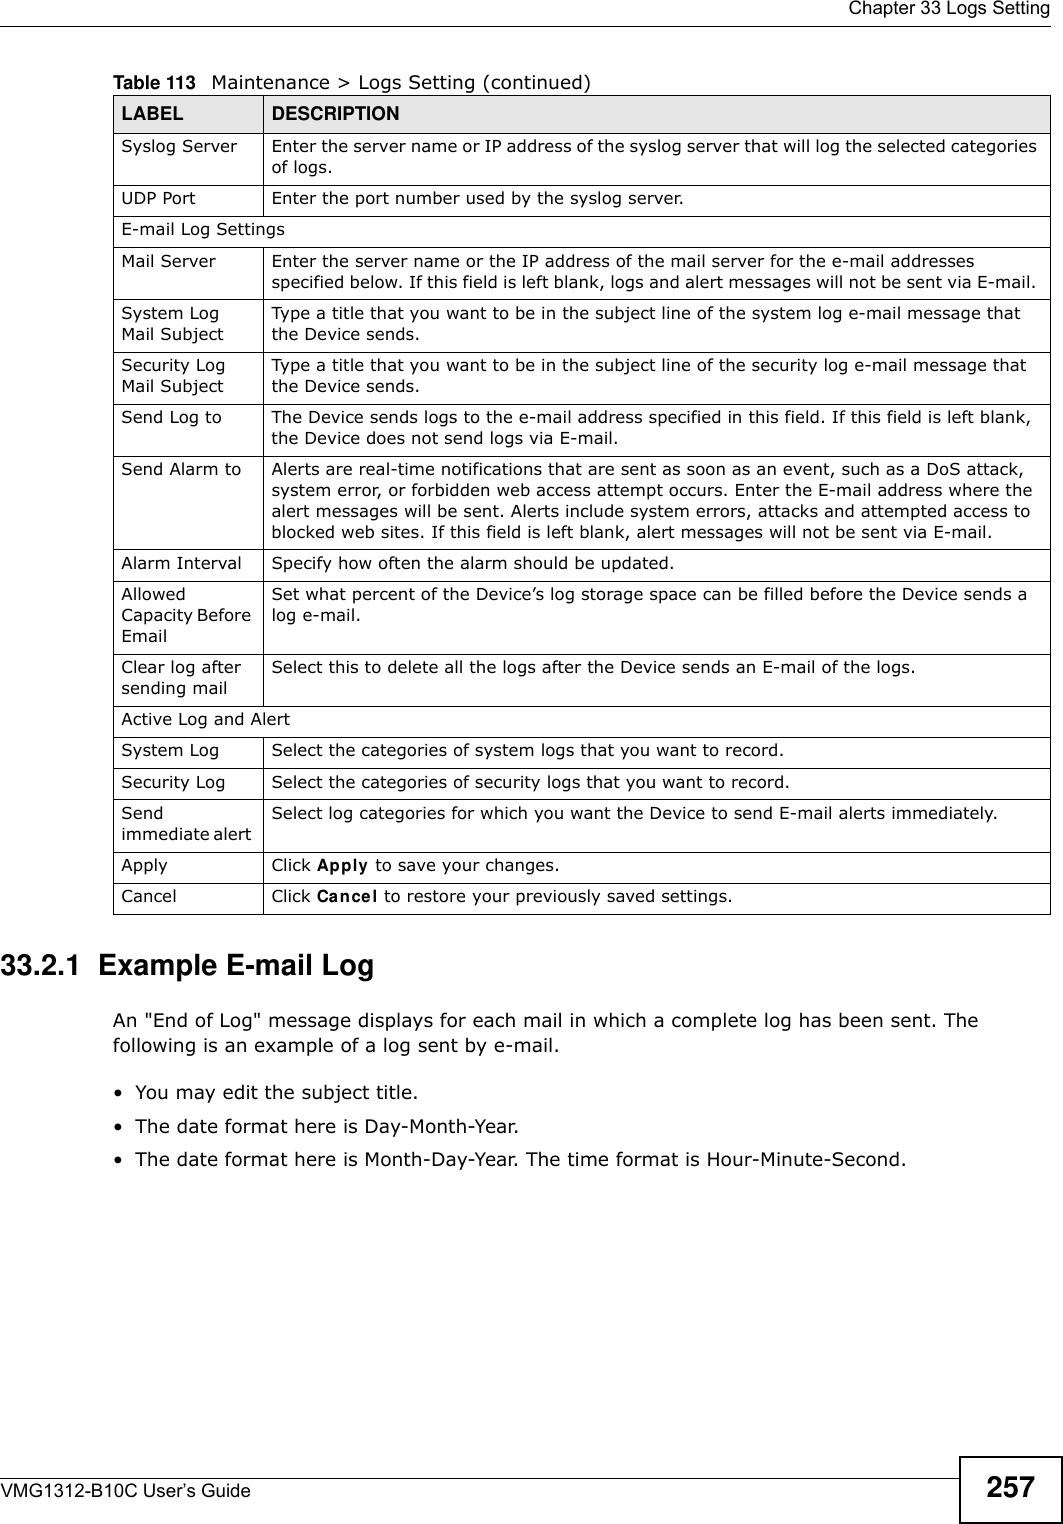  Chapter 33 Logs SettingVMG1312-B10C User’s Guide 25733.2.1  Example E-mail LogAn &quot;End of Log&quot; message displays for each mail in which a complete log has been sent. The following is an example of a log sent by e-mail.• You may edit the subject title.• The date format here is Day-Month-Year.• The date format here is Month-Day-Year. The time format is Hour-Minute-Second.Syslog Server Enter the server name or IP address of the syslog server that will log the selected categories of logs. UDP Port Enter the port number used by the syslog server.E-mail Log SettingsMail Server Enter the server name or the IP address of the mail server for the e-mail addresses specified below. If this field is left blank, logs and alert messages will not be sent via E-mail. System Log Mail SubjectType a title that you want to be in the subject line of the system log e-mail message that the Device sends. Security Log Mail SubjectType a title that you want to be in the subject line of the security log e-mail message that the Device sends. Send Log to The Device sends logs to the e-mail address specified in this field. If this field is left blank, the Device does not send logs via E-mail. Send Alarm to Alerts are real-time notifications that are sent as soon as an event, such as a DoS attack, system error, or forbidden web access attempt occurs. Enter the E-mail address where the alert messages will be sent. Alerts include system errors, attacks and attempted access to blocked web sites. If this field is left blank, alert messages will not be sent via E-mail. Alarm Interval Specify how often the alarm should be updated.Allowed Capacity Before Email Set what percent of the Device’s log storage space can be filled before the Device sends a log e-mail. Clear log after sending mailSelect this to delete all the logs after the Device sends an E-mail of the logs.Active Log and AlertSystem Log Select the categories of system logs that you want to record.Security Log Select the categories of security logs that you want to record.Send immediate alert Select log categories for which you want the Device to send E-mail alerts immediately. Apply Click Apply to save your changes.Cancel Click Cancel to restore your previously saved settings.Table 113   Maintenance &gt; Logs Setting (continued)LABEL DESCRIPTION